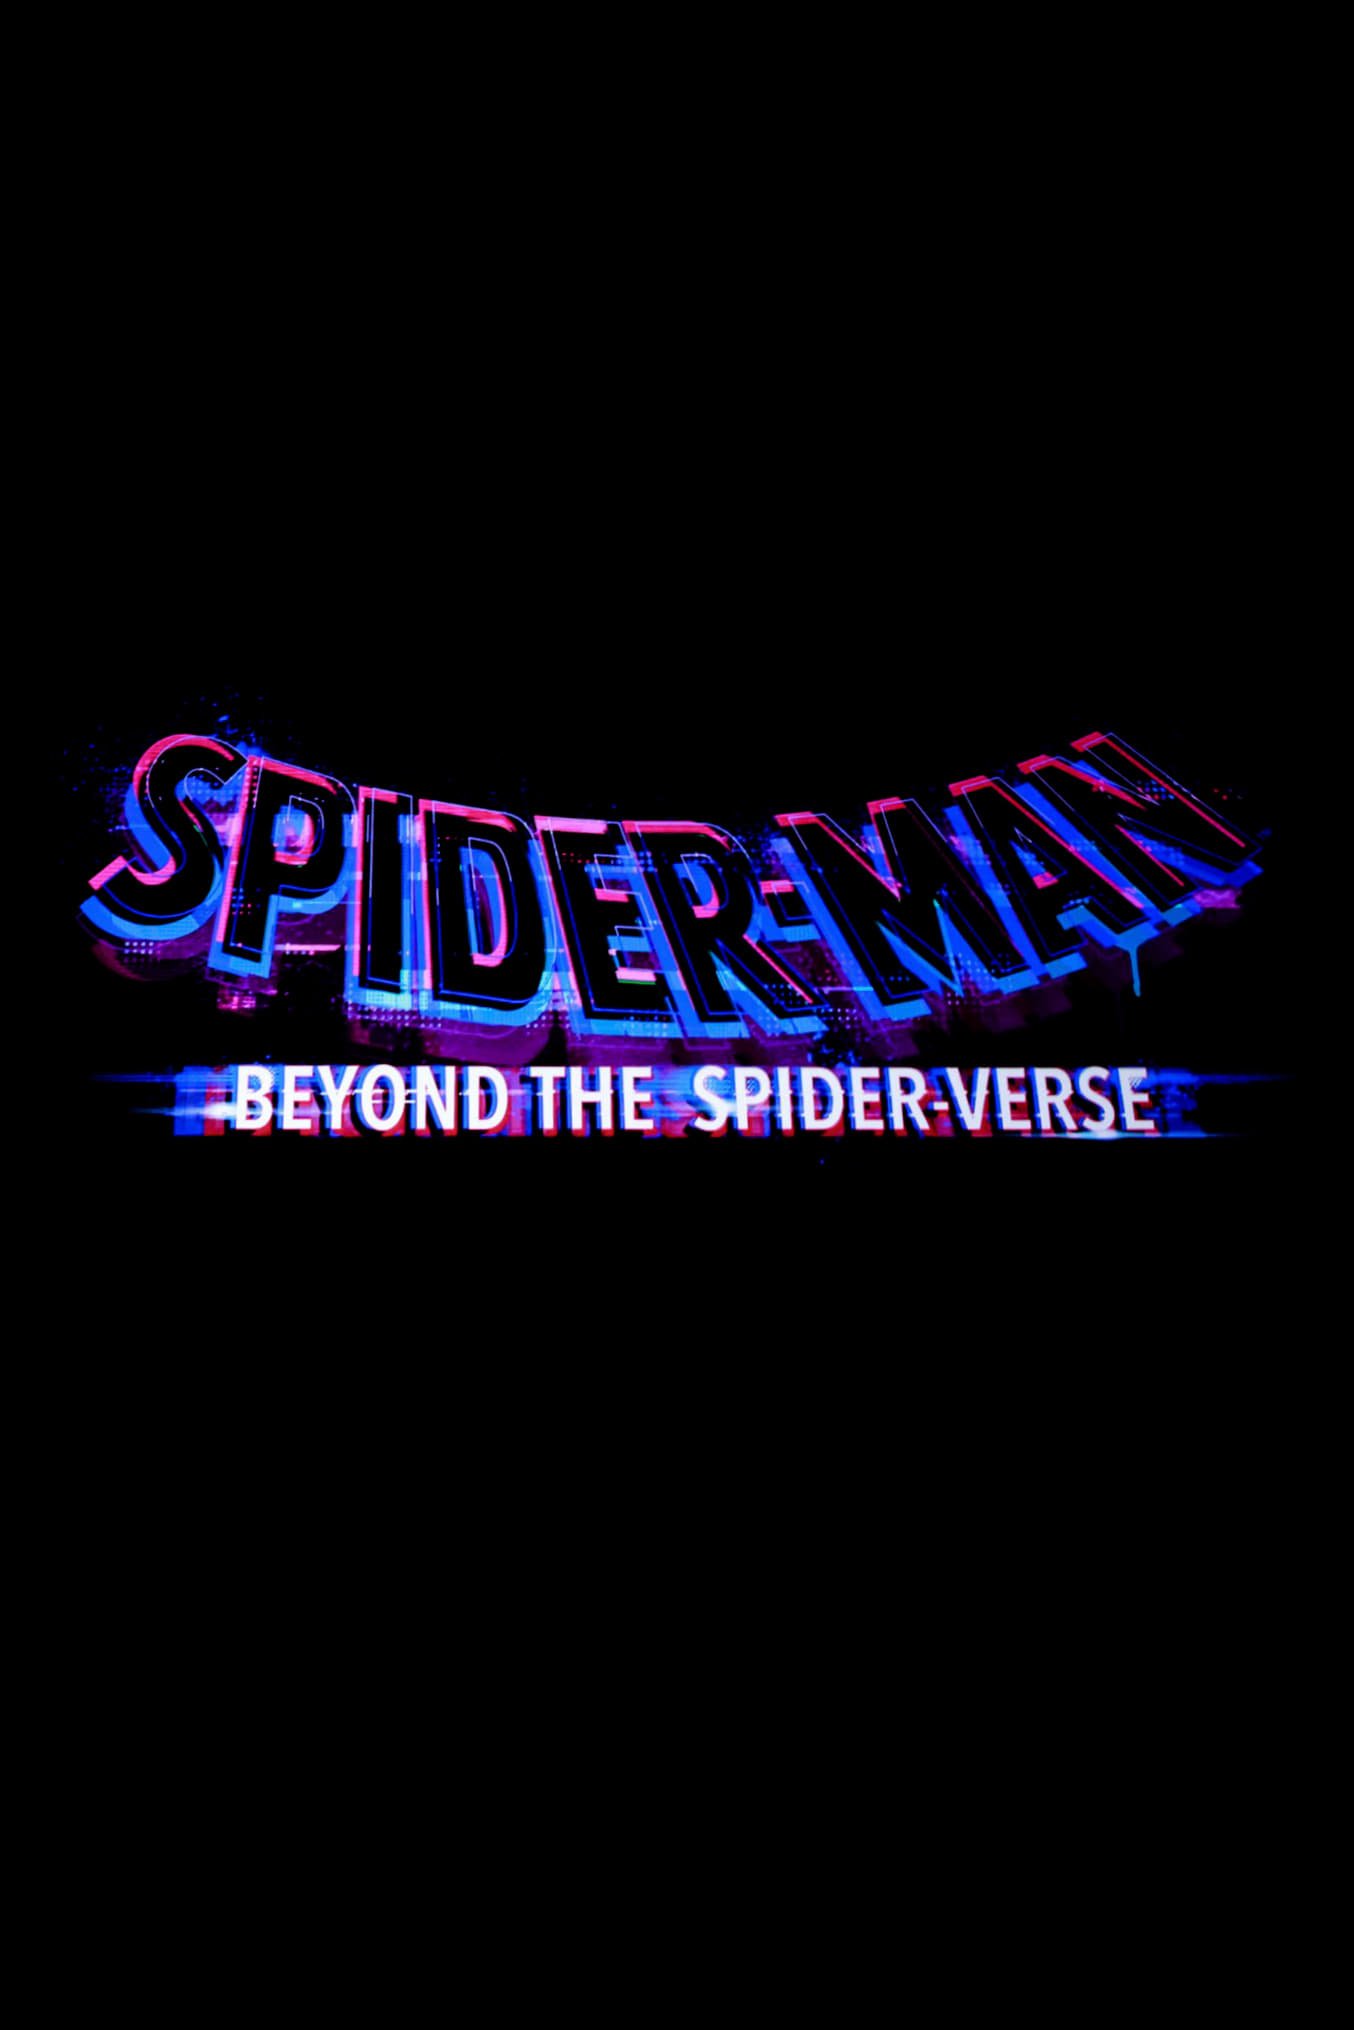 Spider-Man: Across the Spider-Verse (Part Two)